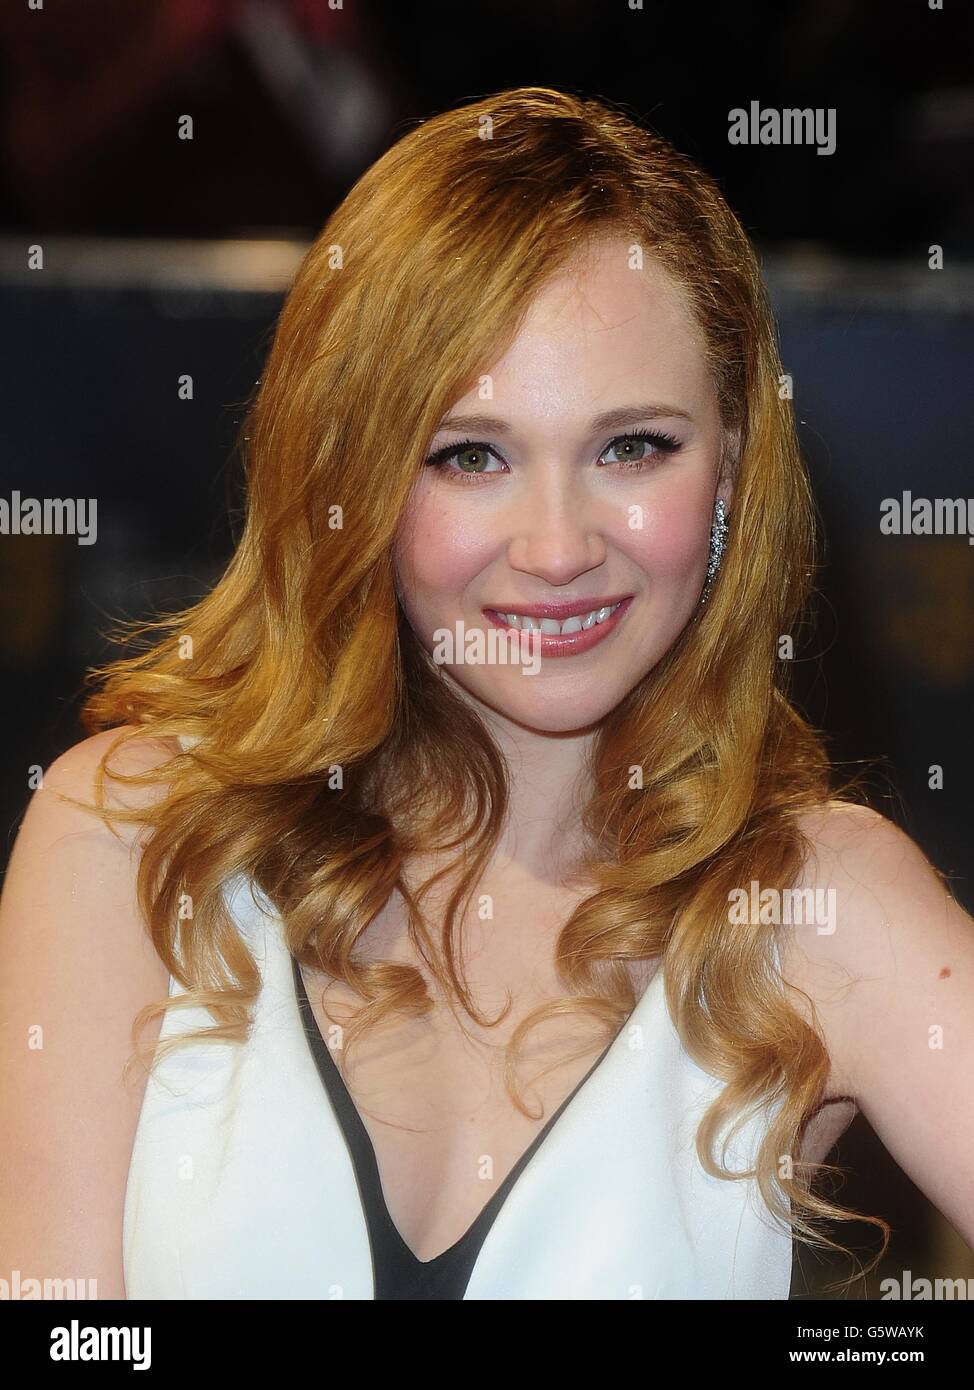 BAFTA Film Awards 2013 - Arrivals - London. Juno Temple arriving for the 2013 British Academy Film Awards at the Royal Opera House, Bow Street, London. Stock Photo